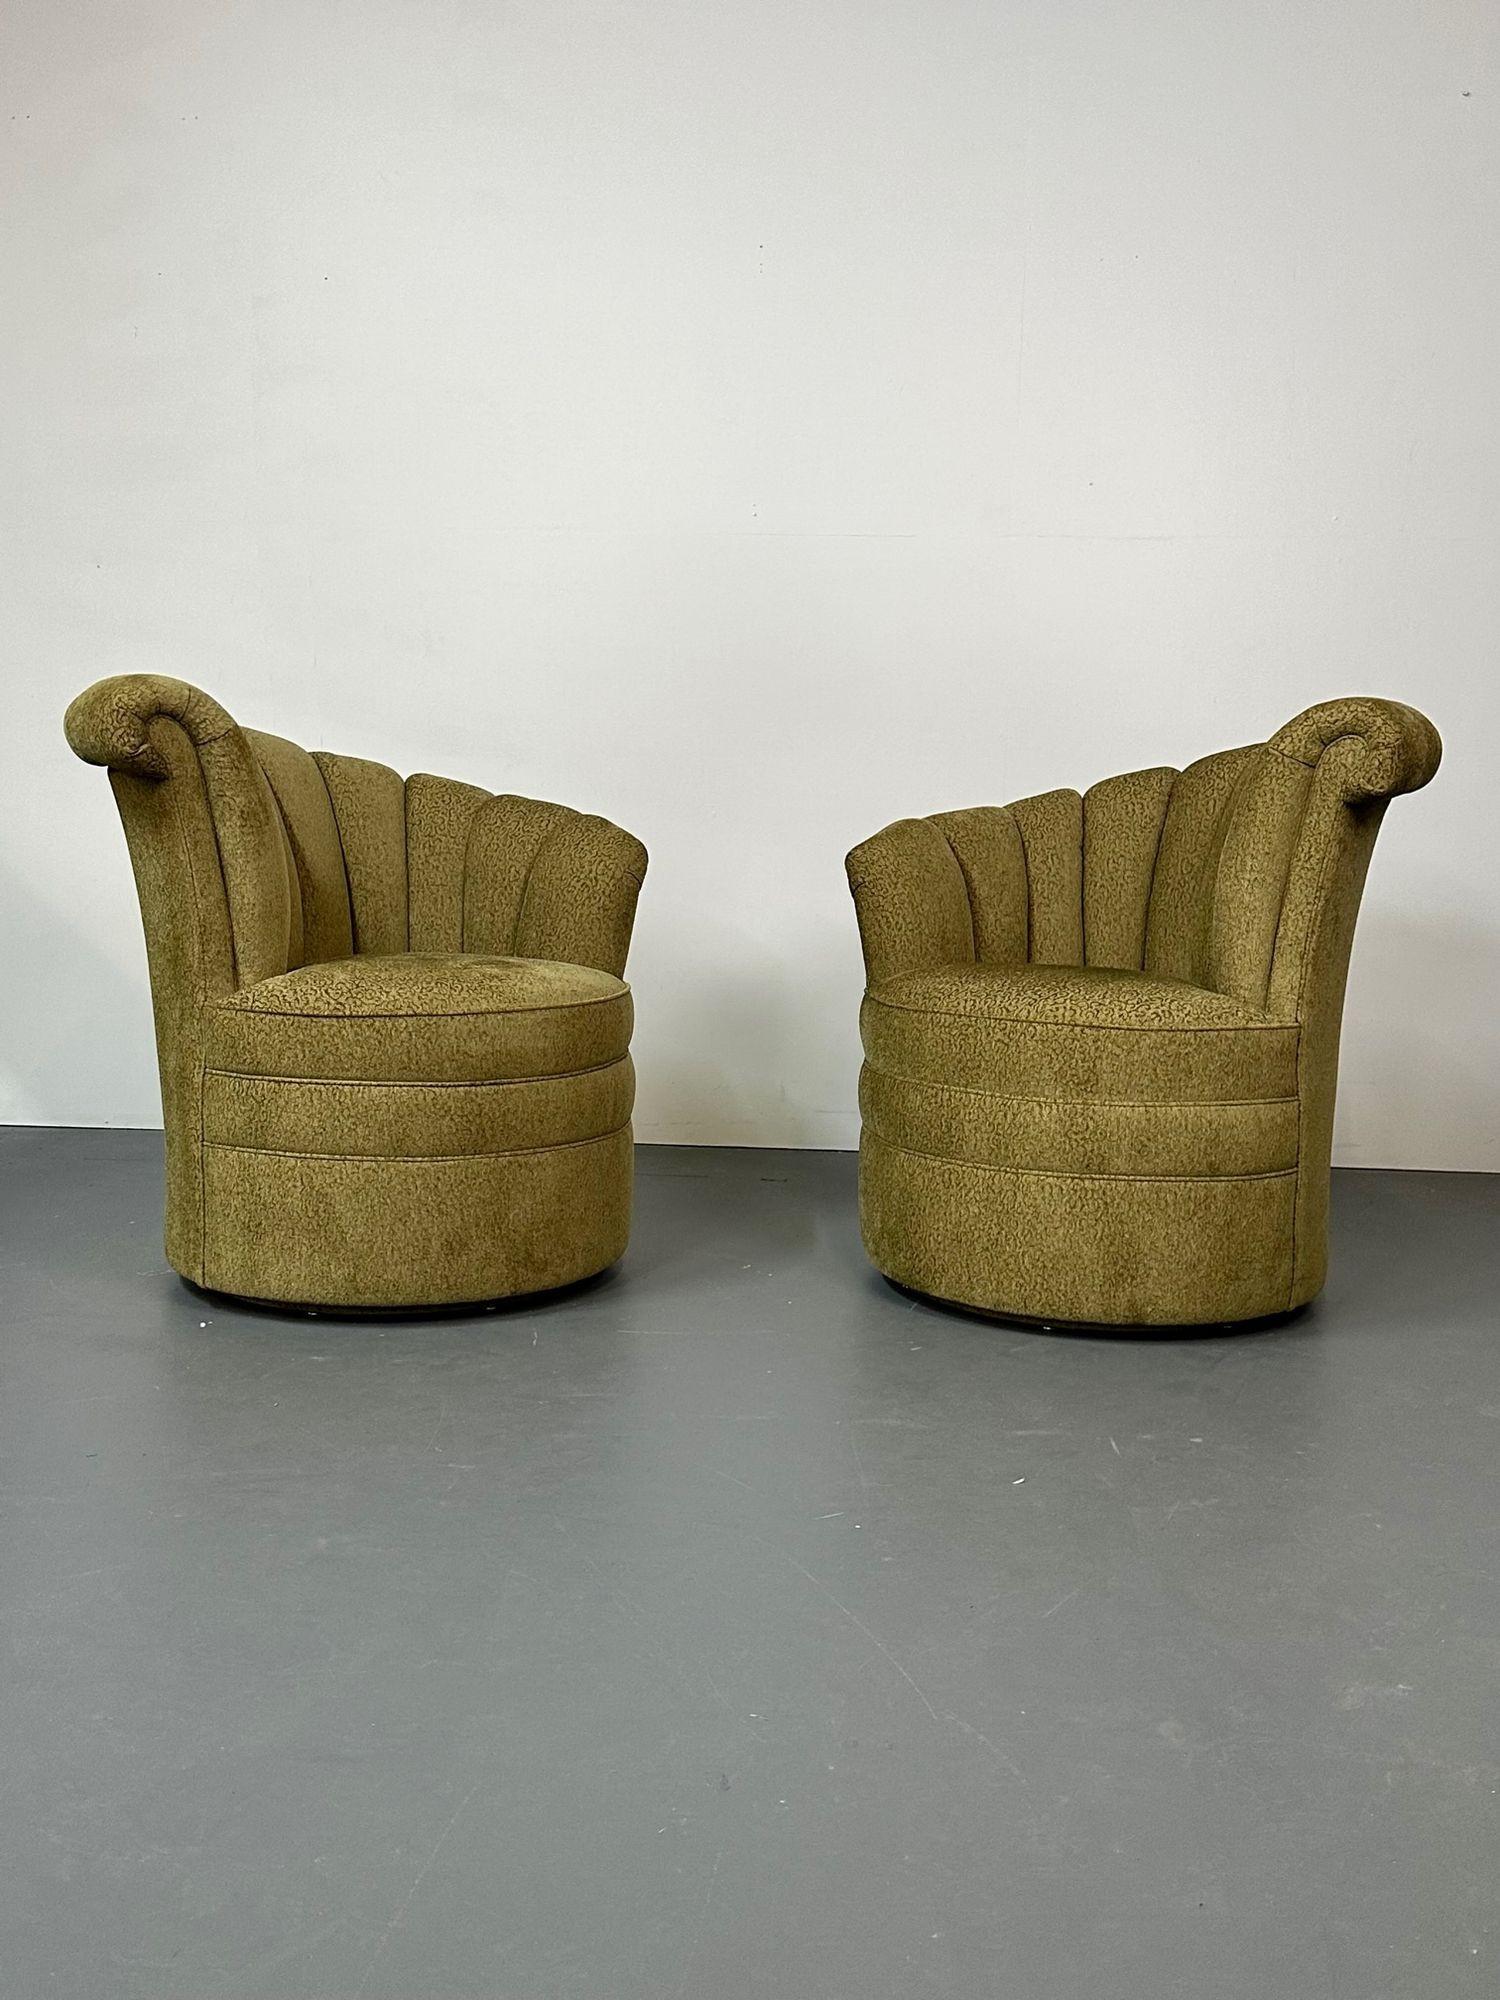 Pair Hollywood Regency Dorothy Draper Style Swivel / Accent chairs, Channel Back

Chic pair of swivel chairs in the style of traditional designer Dorothy Draper. The chairs have opposing channeled back in the art deco style. Similar in form to